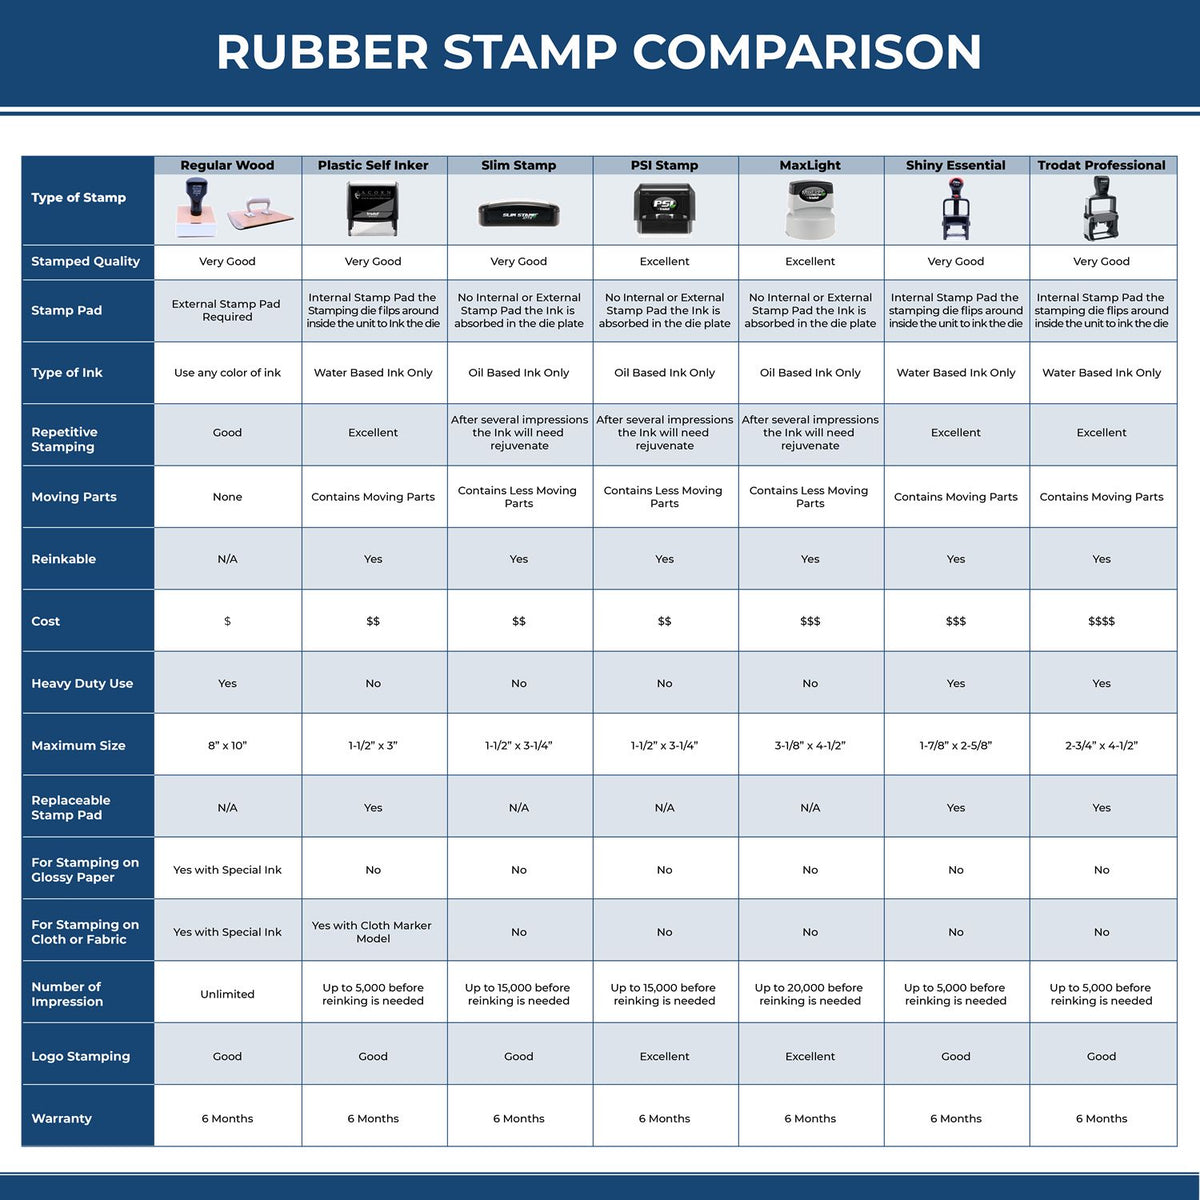 Large Duplicate Rubber Stamp 4120R Rubber Stamp Comparison